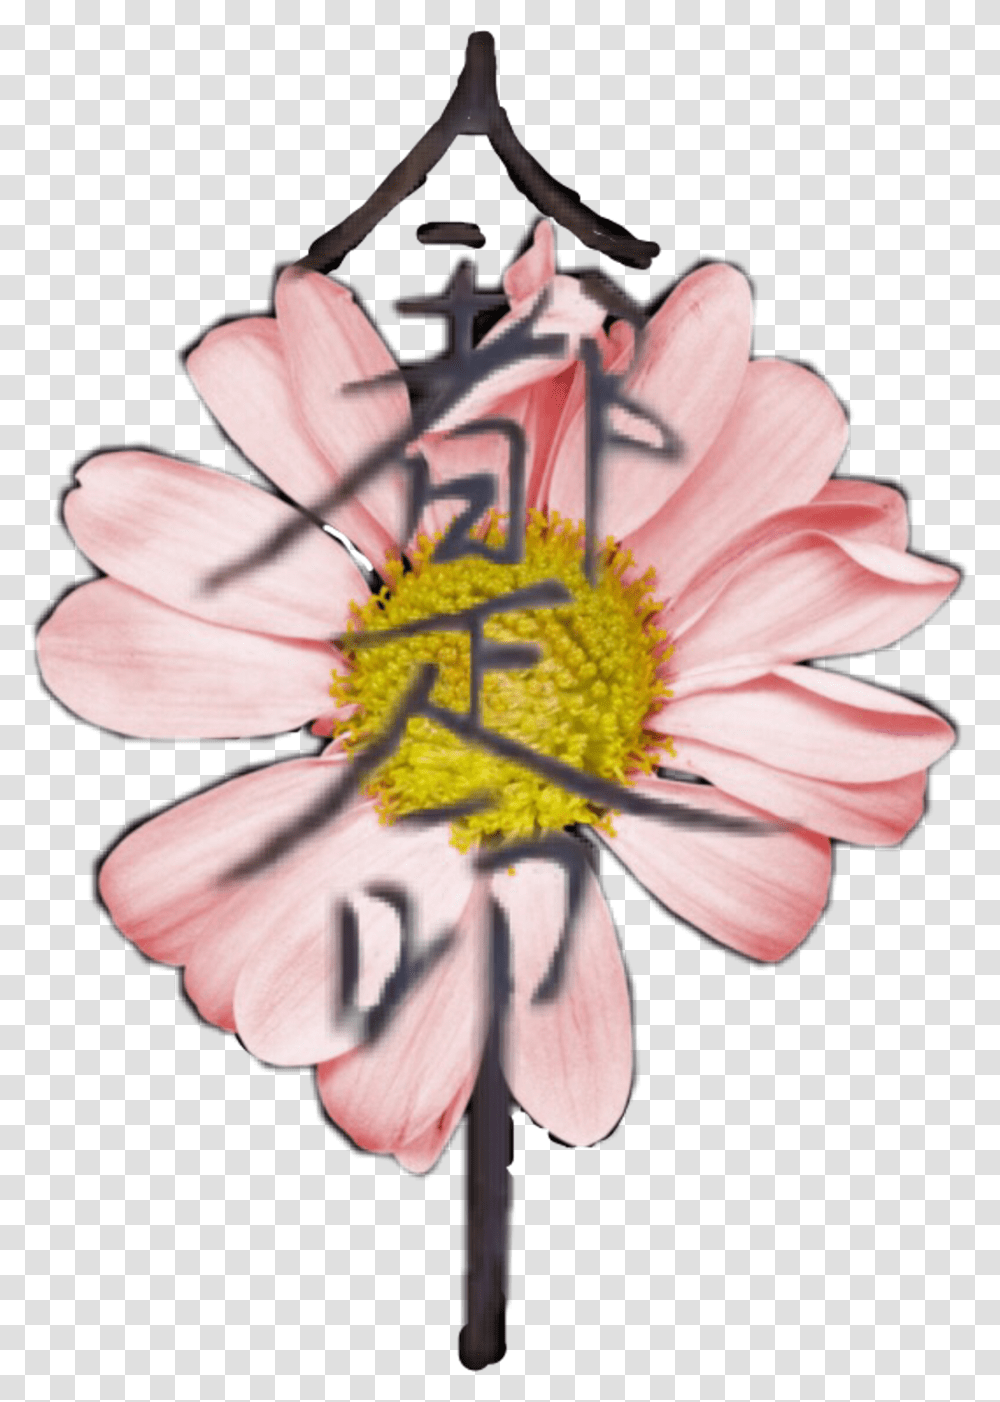 Daisy Download Daisy, Plant, Pollen, Flower, Blossom Transparent Png